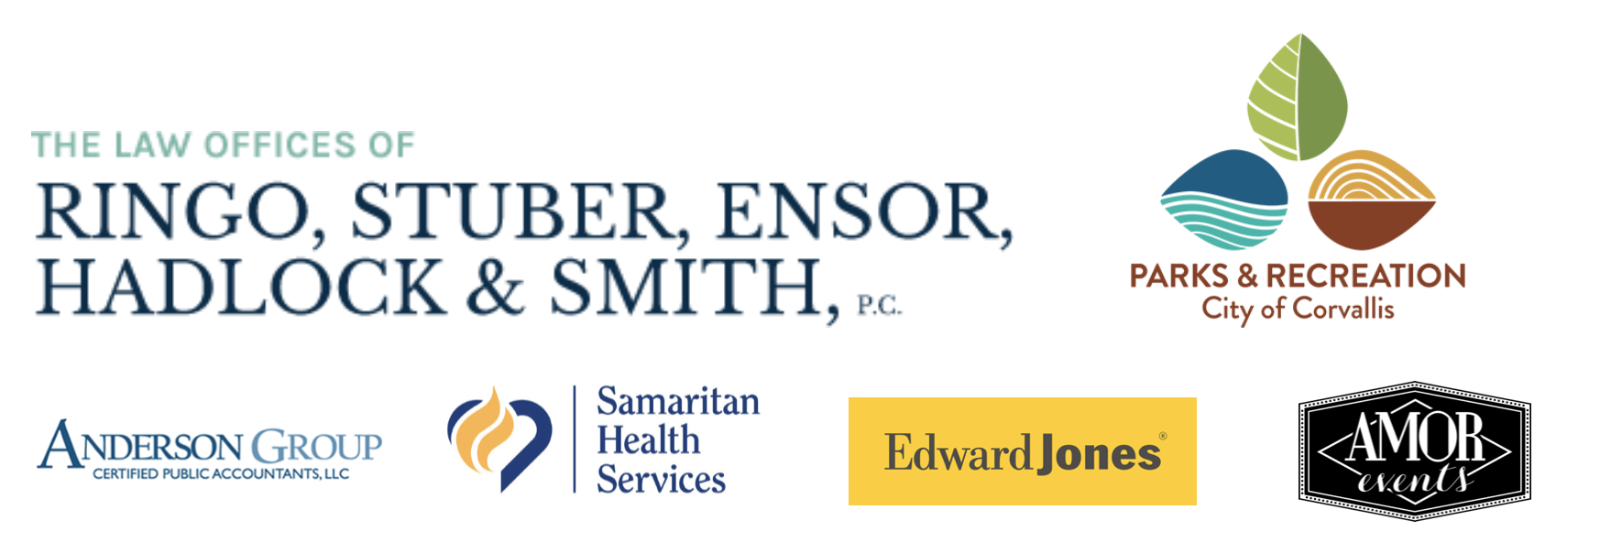 Logos for major sponsors of Gala: Ringo Stuber Ensor Hadlock & Smith Attorneys at law, Anderson Group CPAs, Samaritan Health Services, Edward Jones Financial Planners, and Amor Events